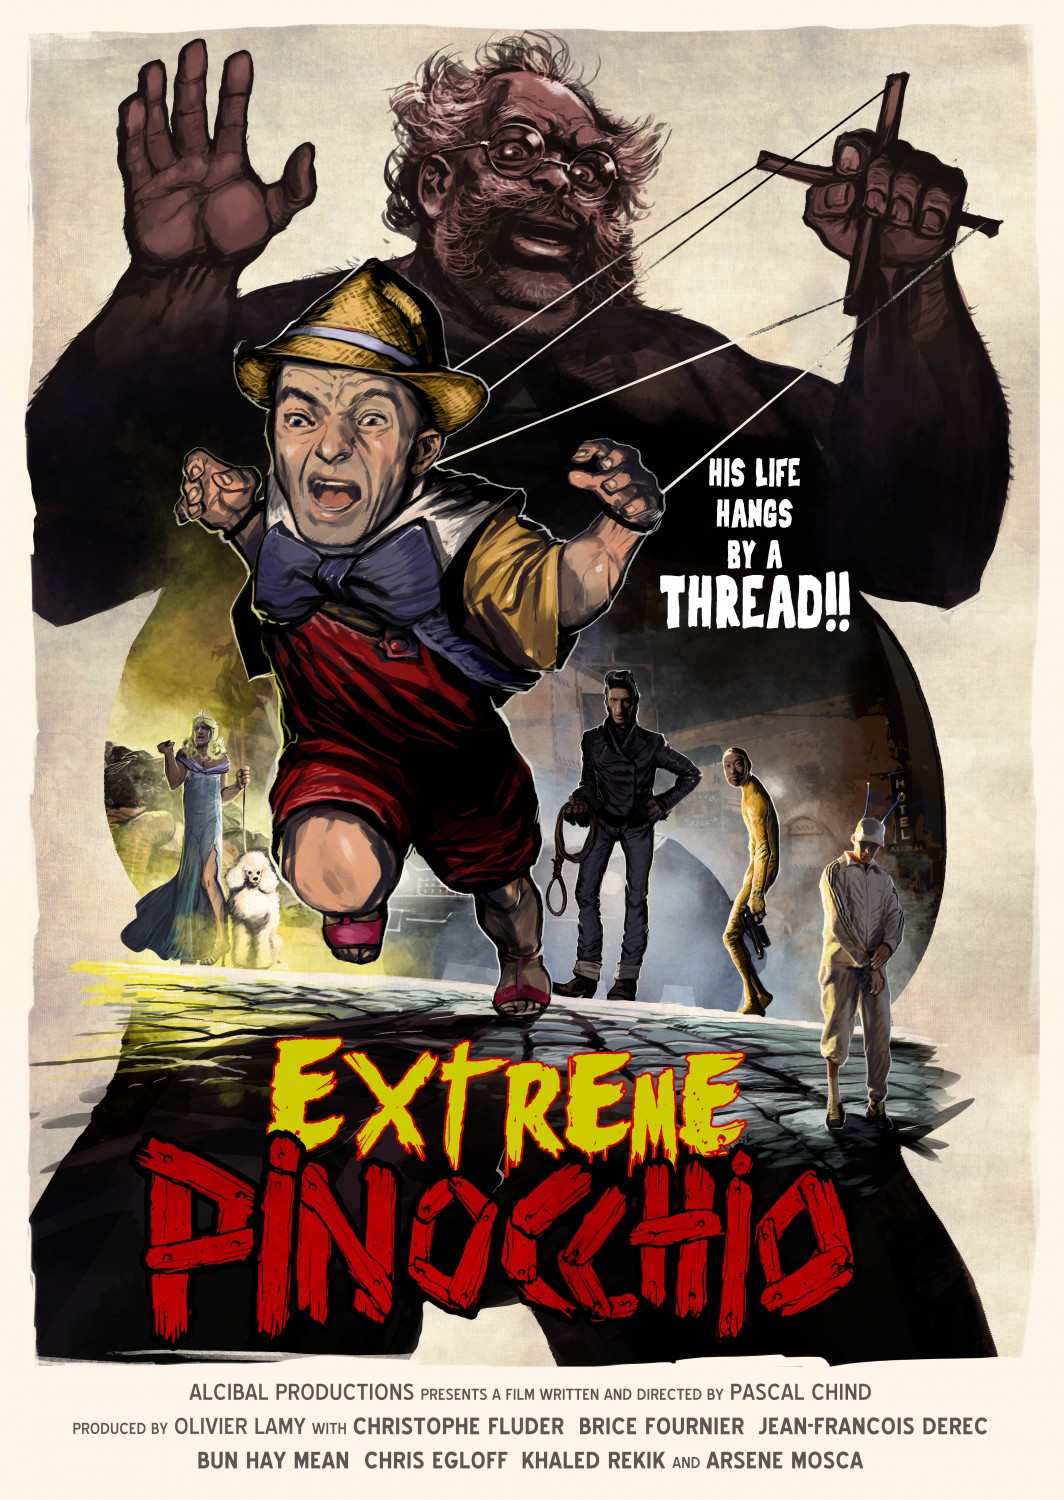 Extra Large Movie Poster Image for Extrme Pinocchio